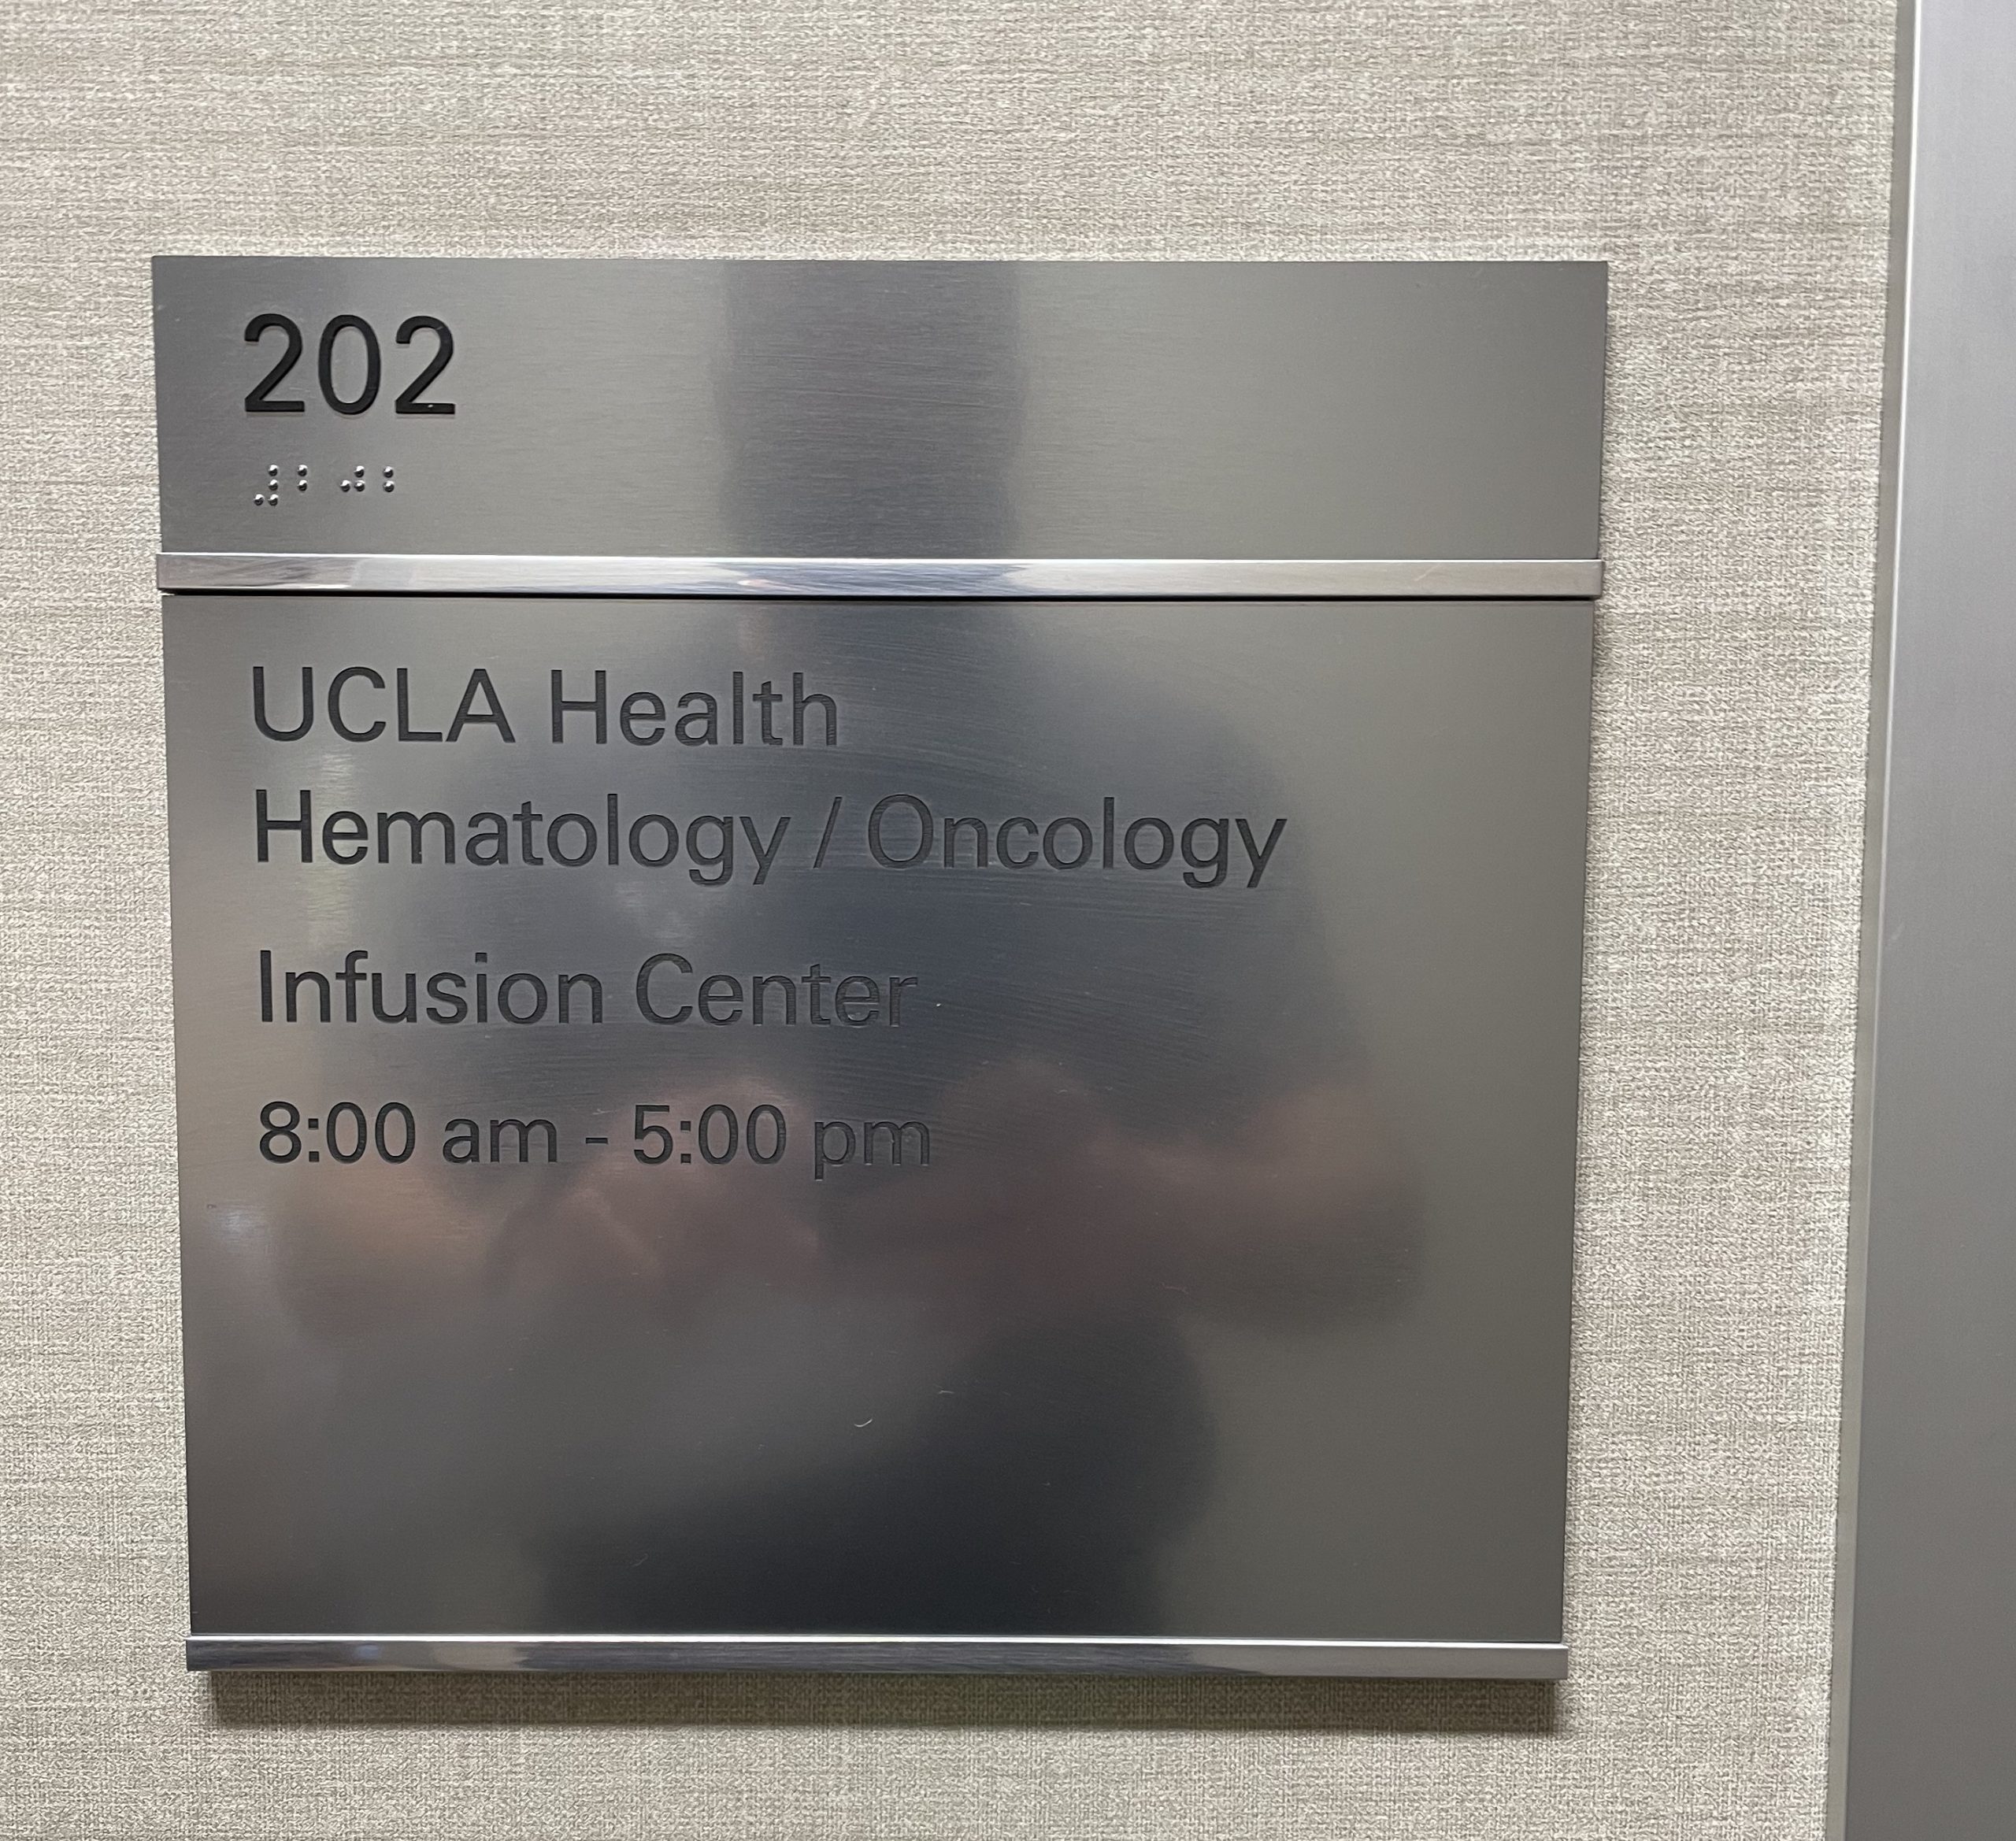 This is the directory suite plaque we made for UCLA Health. With this, the Westlake Village institution's halls will be easier to navigate.